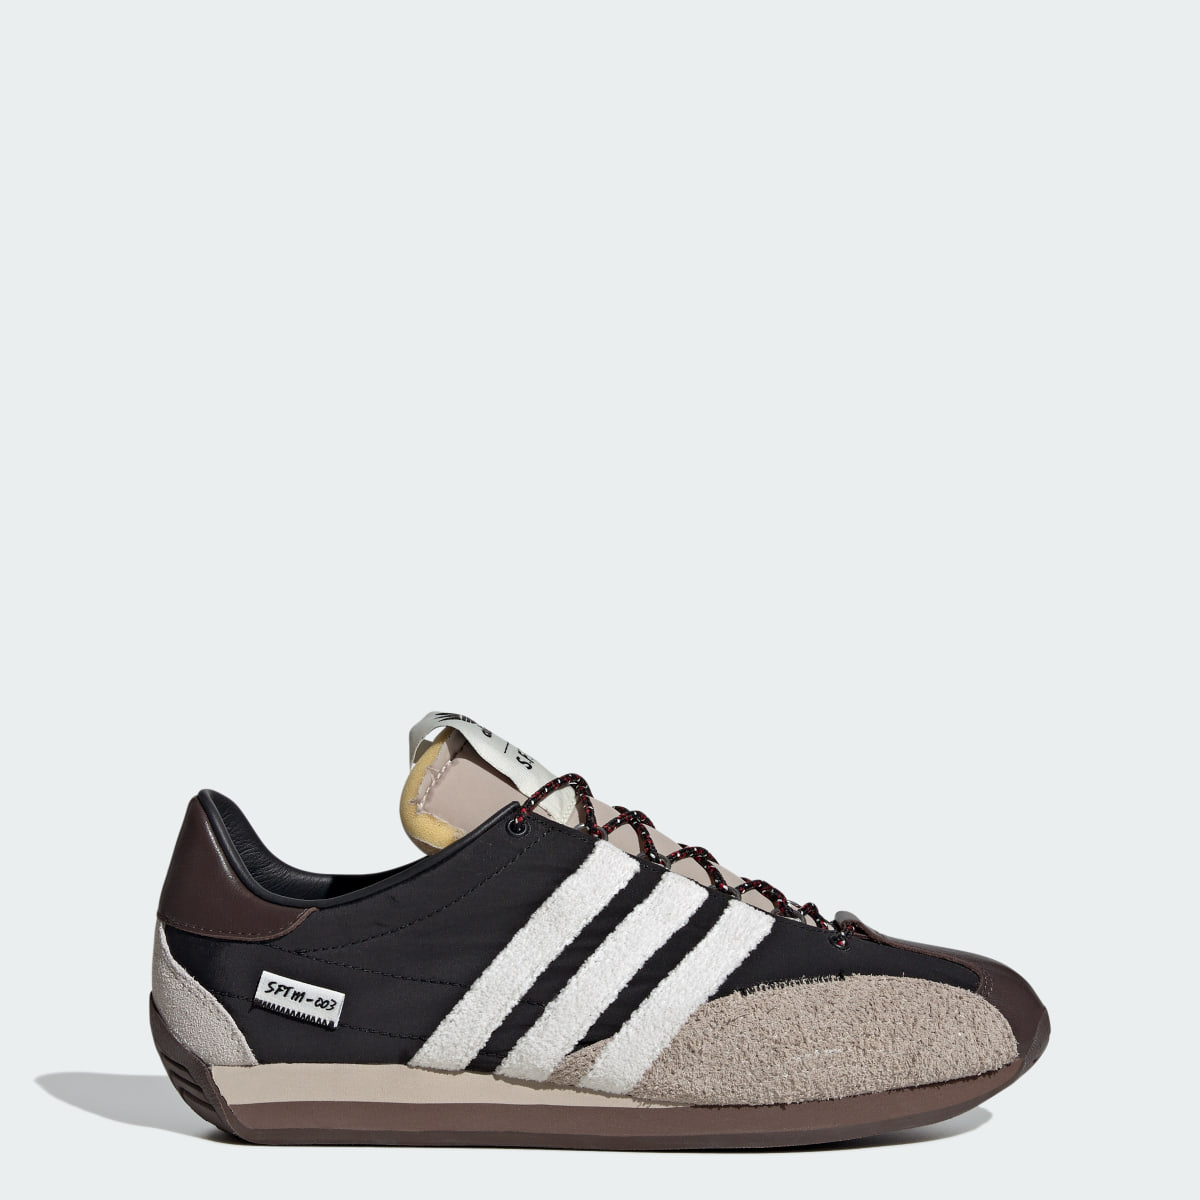 Adidas SFTM Country OG Low Trainers - ID3546